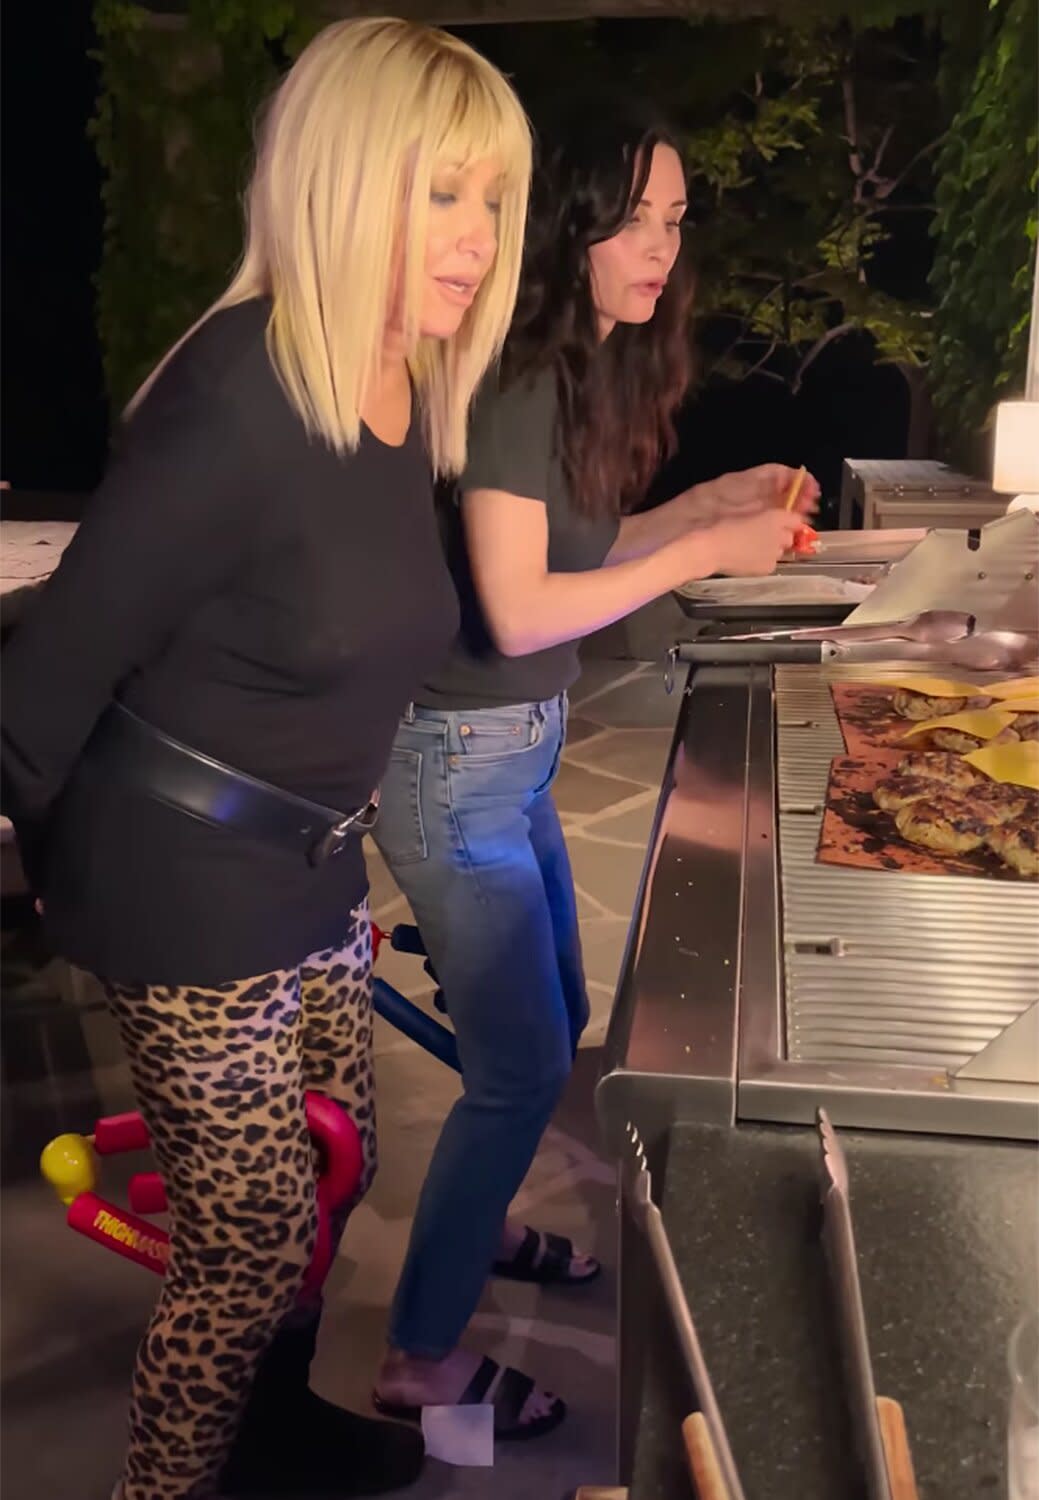 Courteney Cox and Suzanne Somers Make Burgers While Working Out with Thighmasters: 'Cook and Tone'